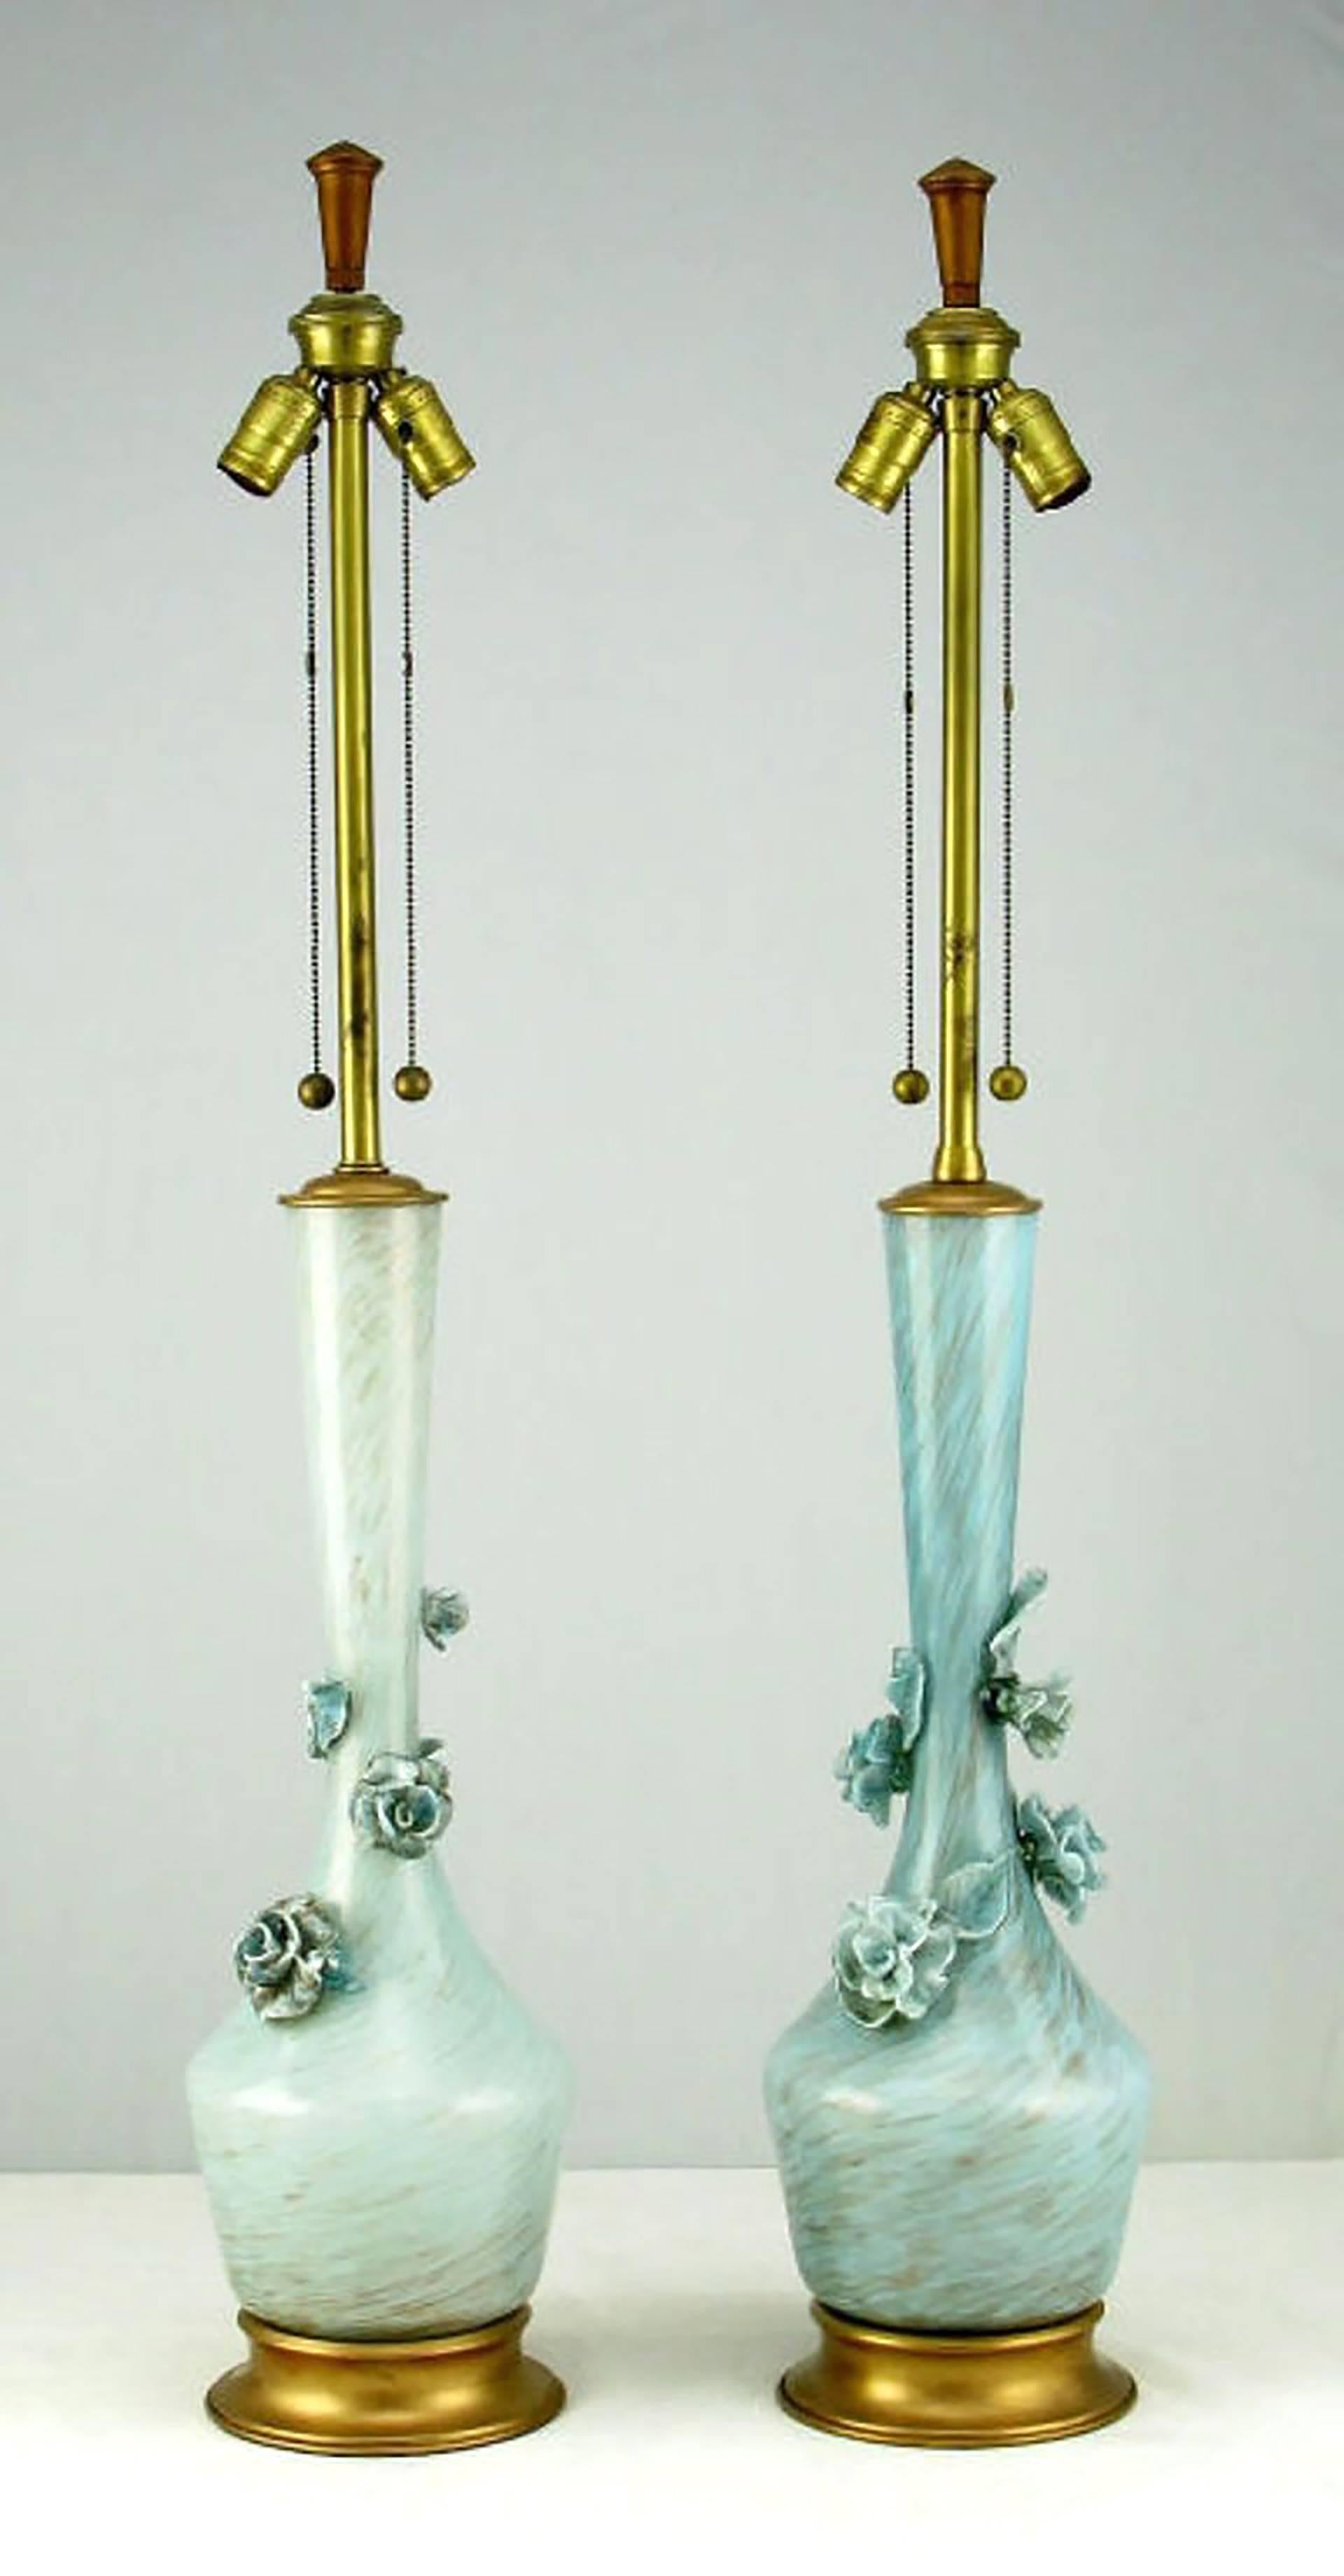 Pair of large blue handblown Marbro table lamps. Blue Murano handblown glass bodies have internal flecks of gold. Gold leafed brass caps and bases. Each lamp adorned with blue glass flowers and leaves. handblown glass can have some color variation